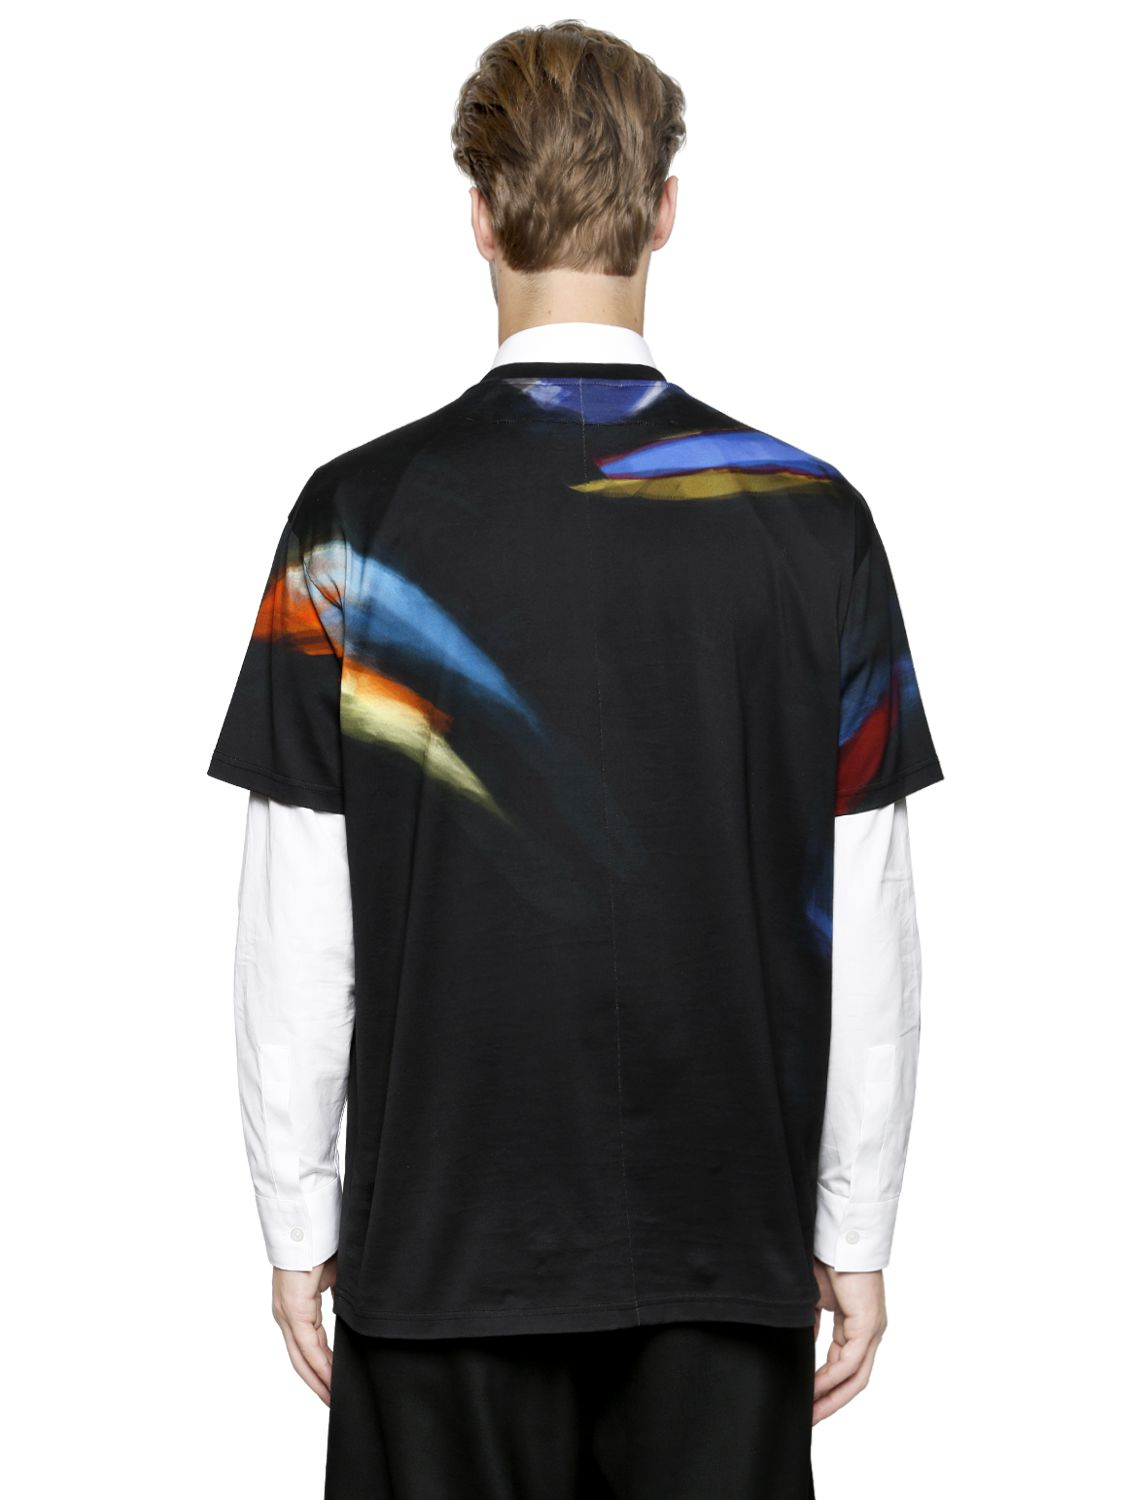 Lyst - Givenchy African Columbian Fit Cotton Tshirt in Black for Men